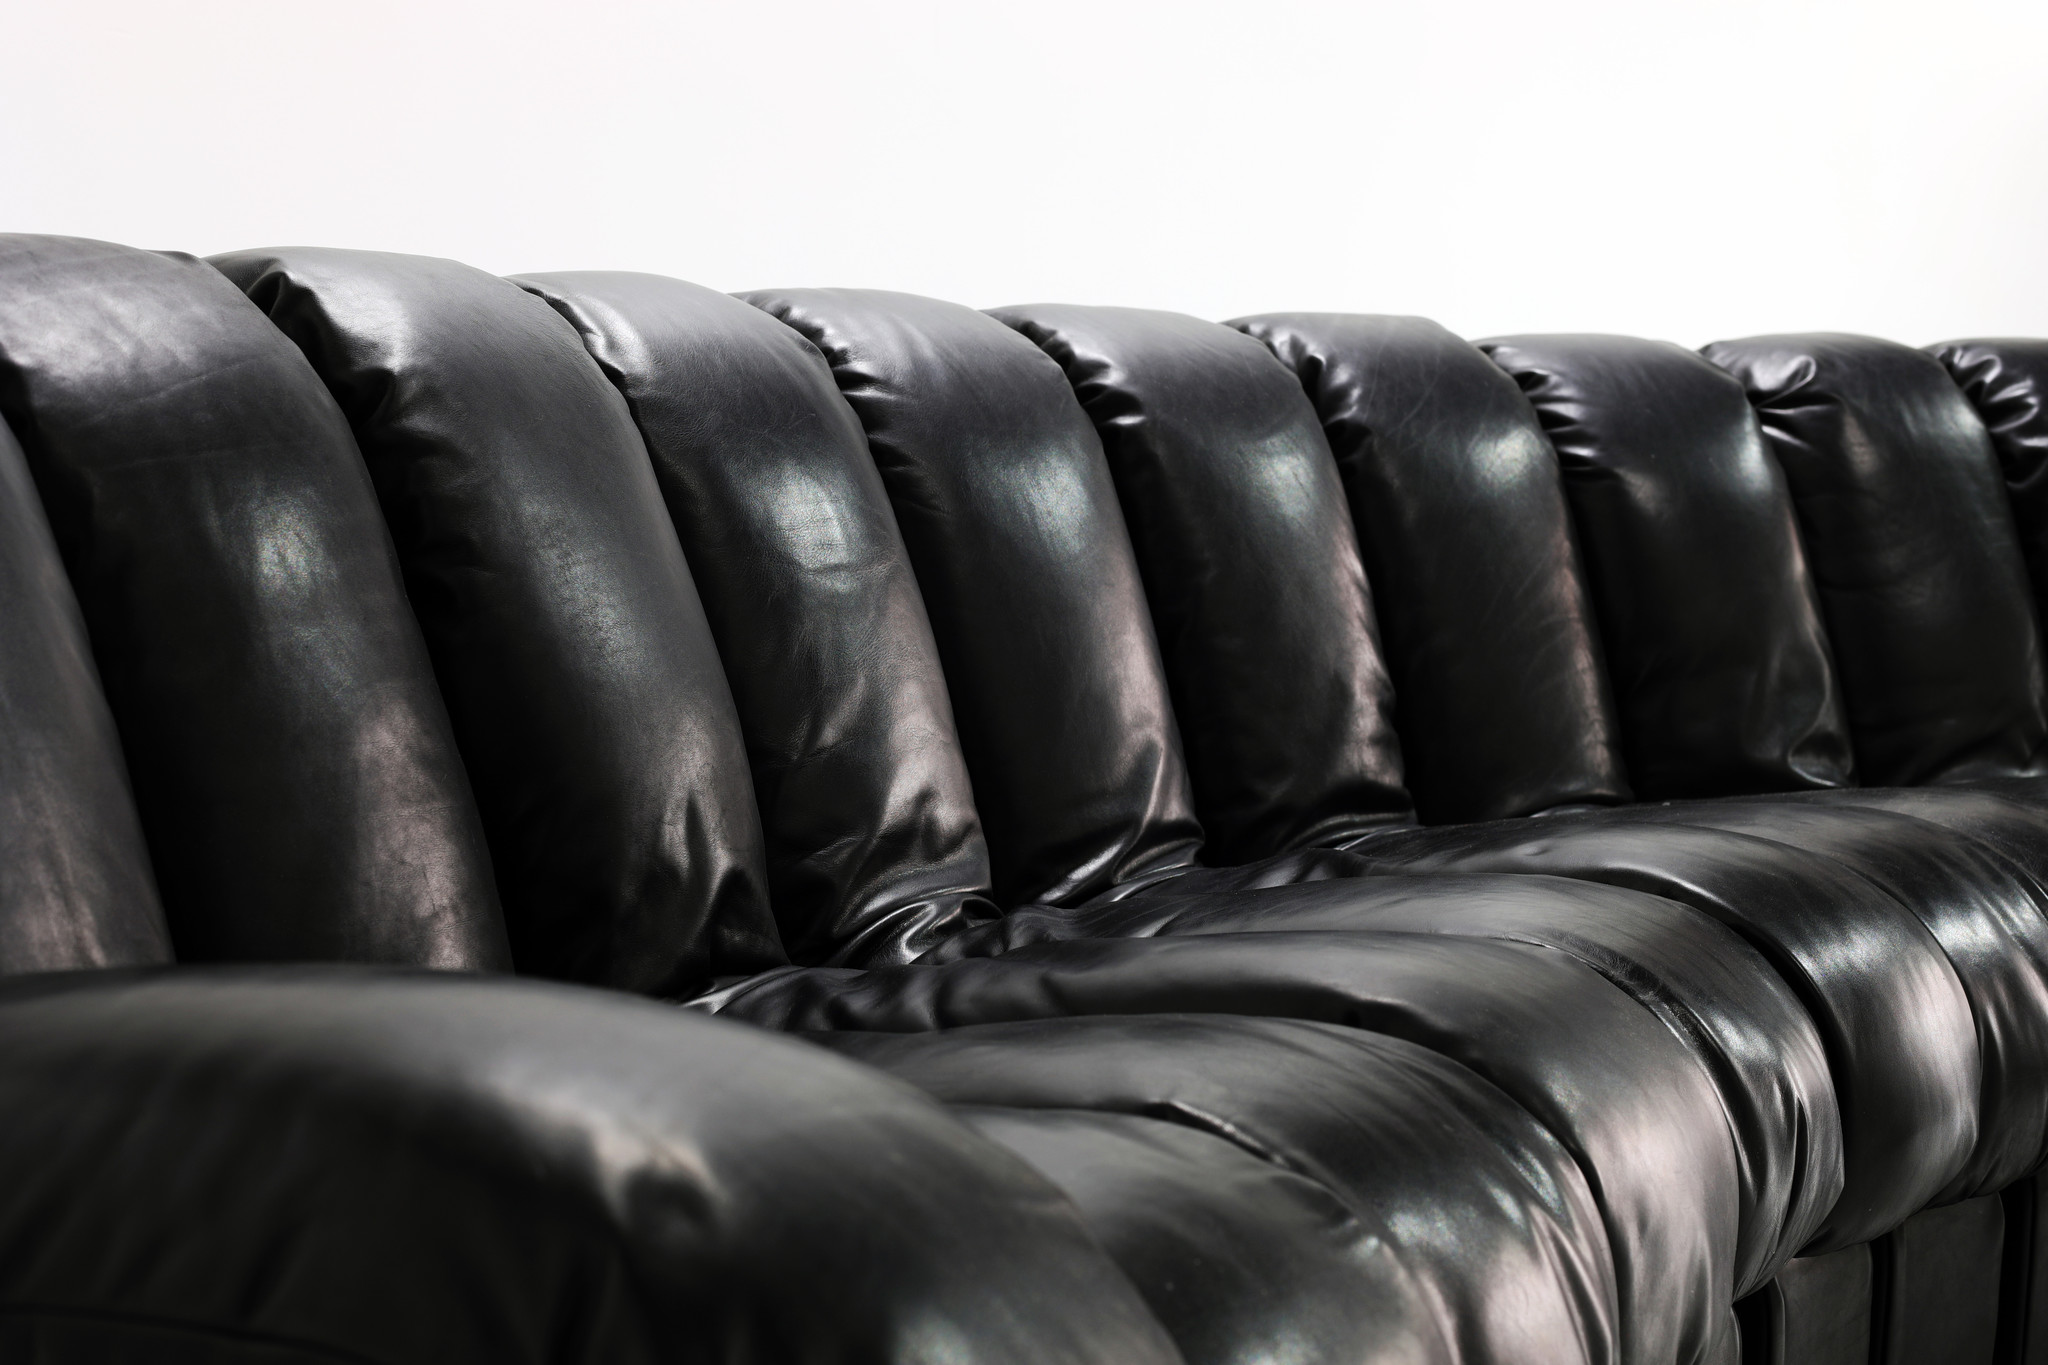 The iconic "Snake sofa" De Sede DS600